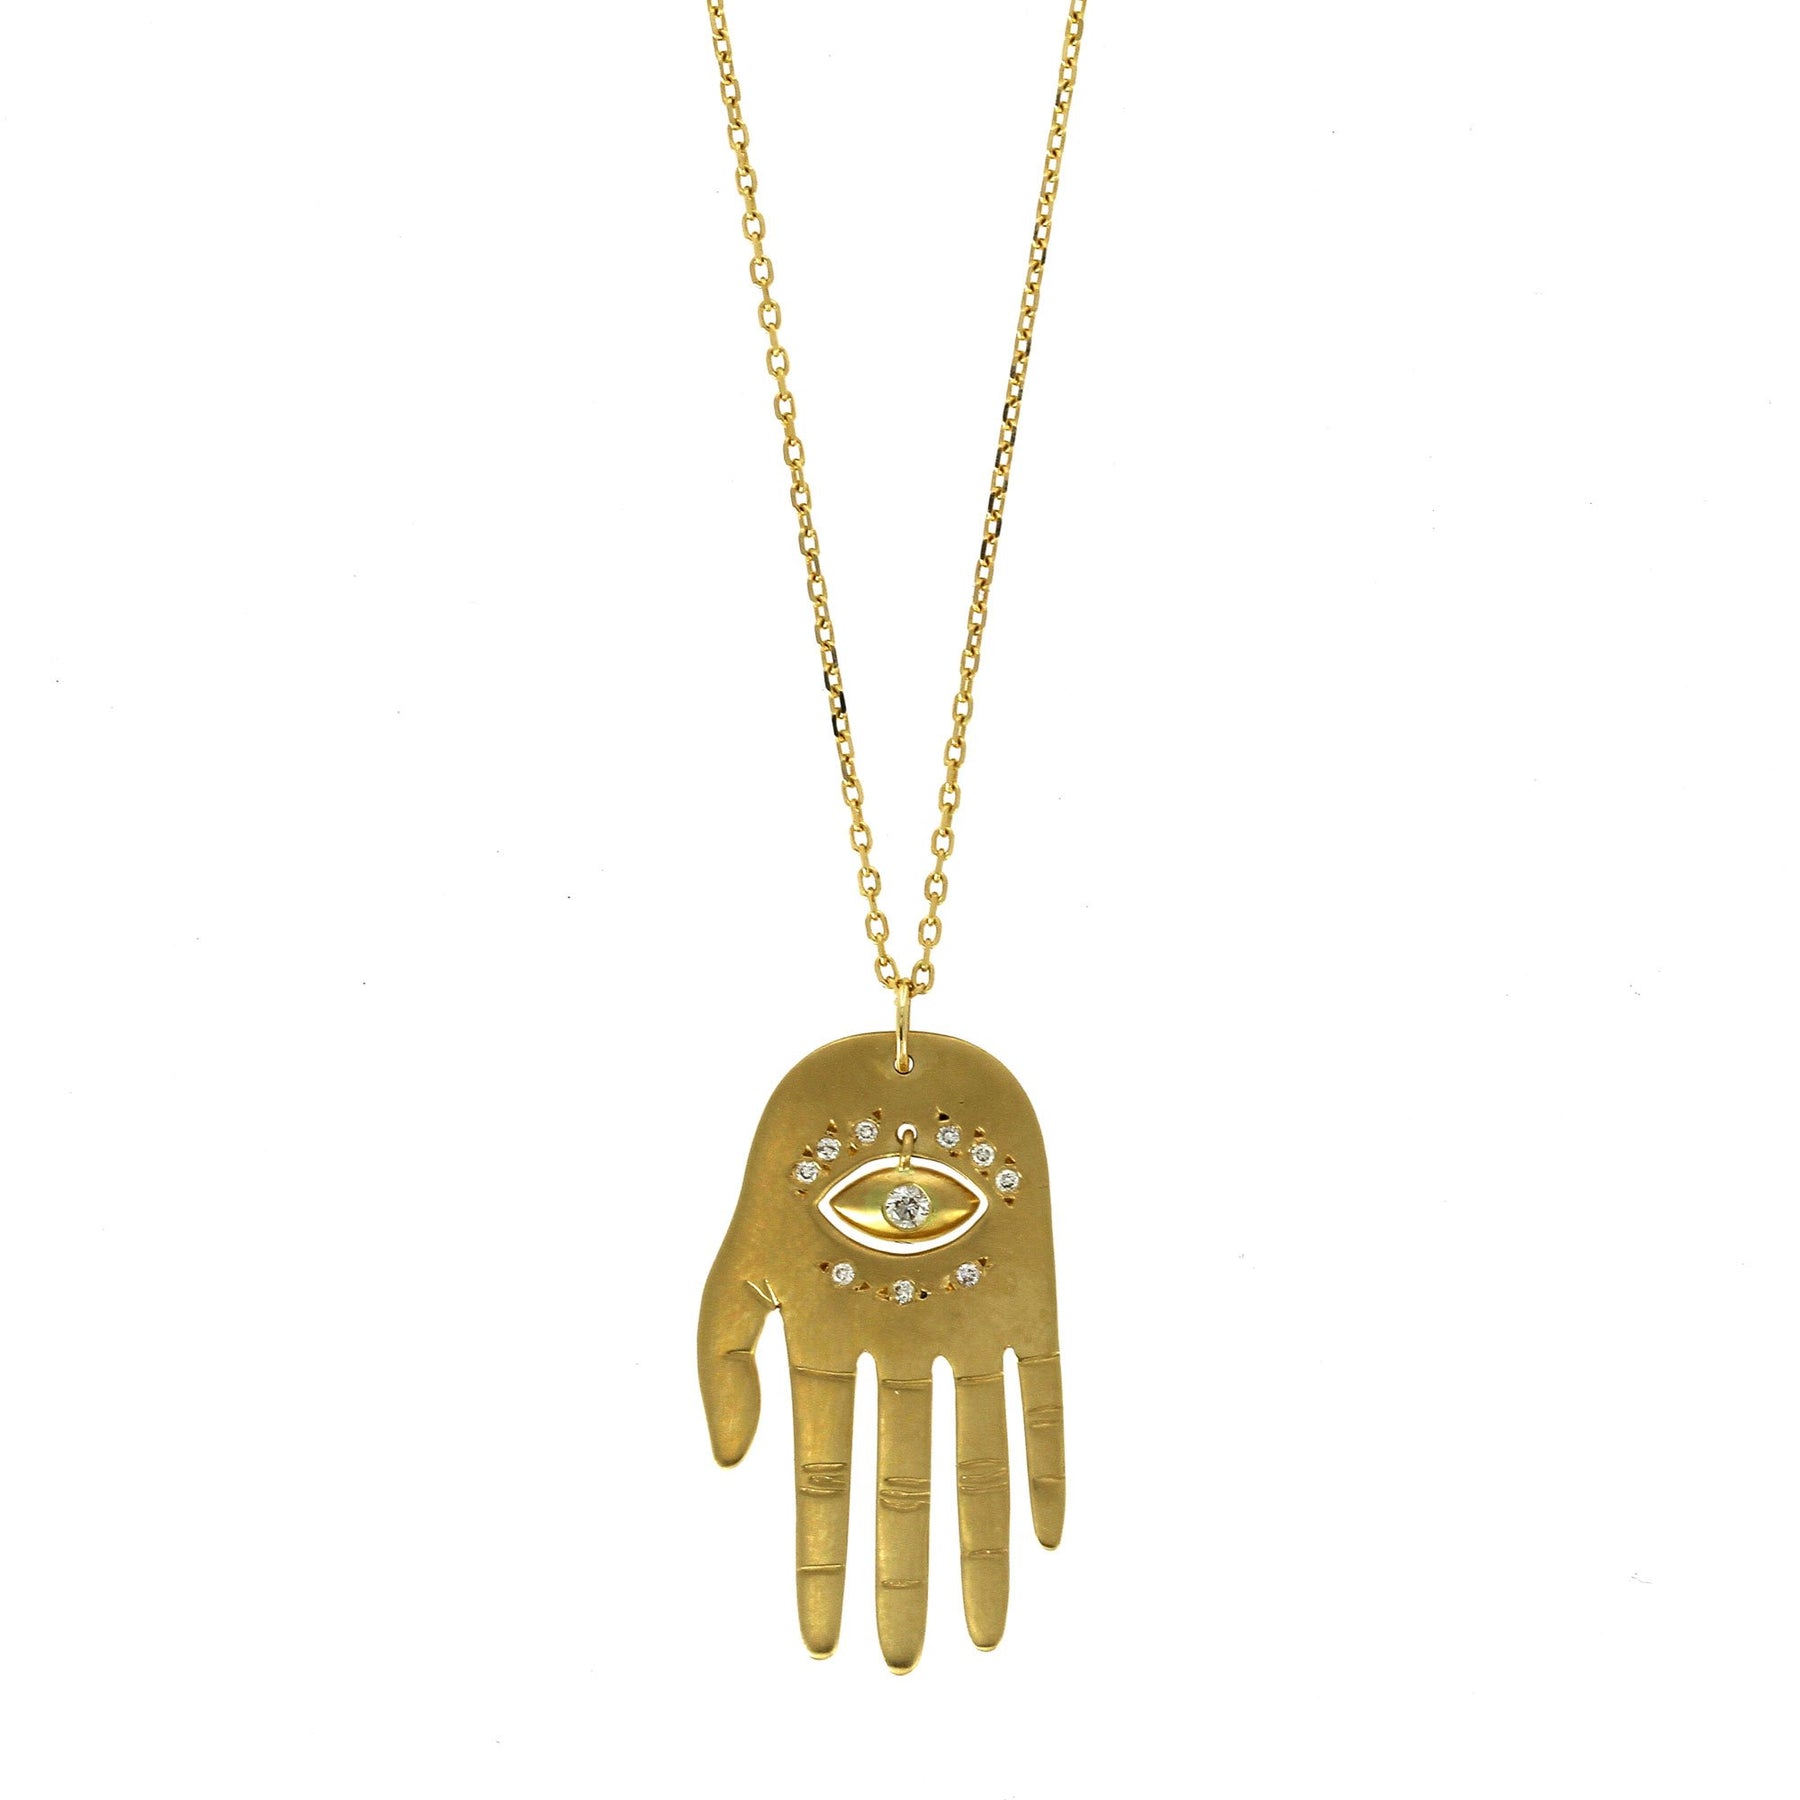 Big Hand and Eye Necklace